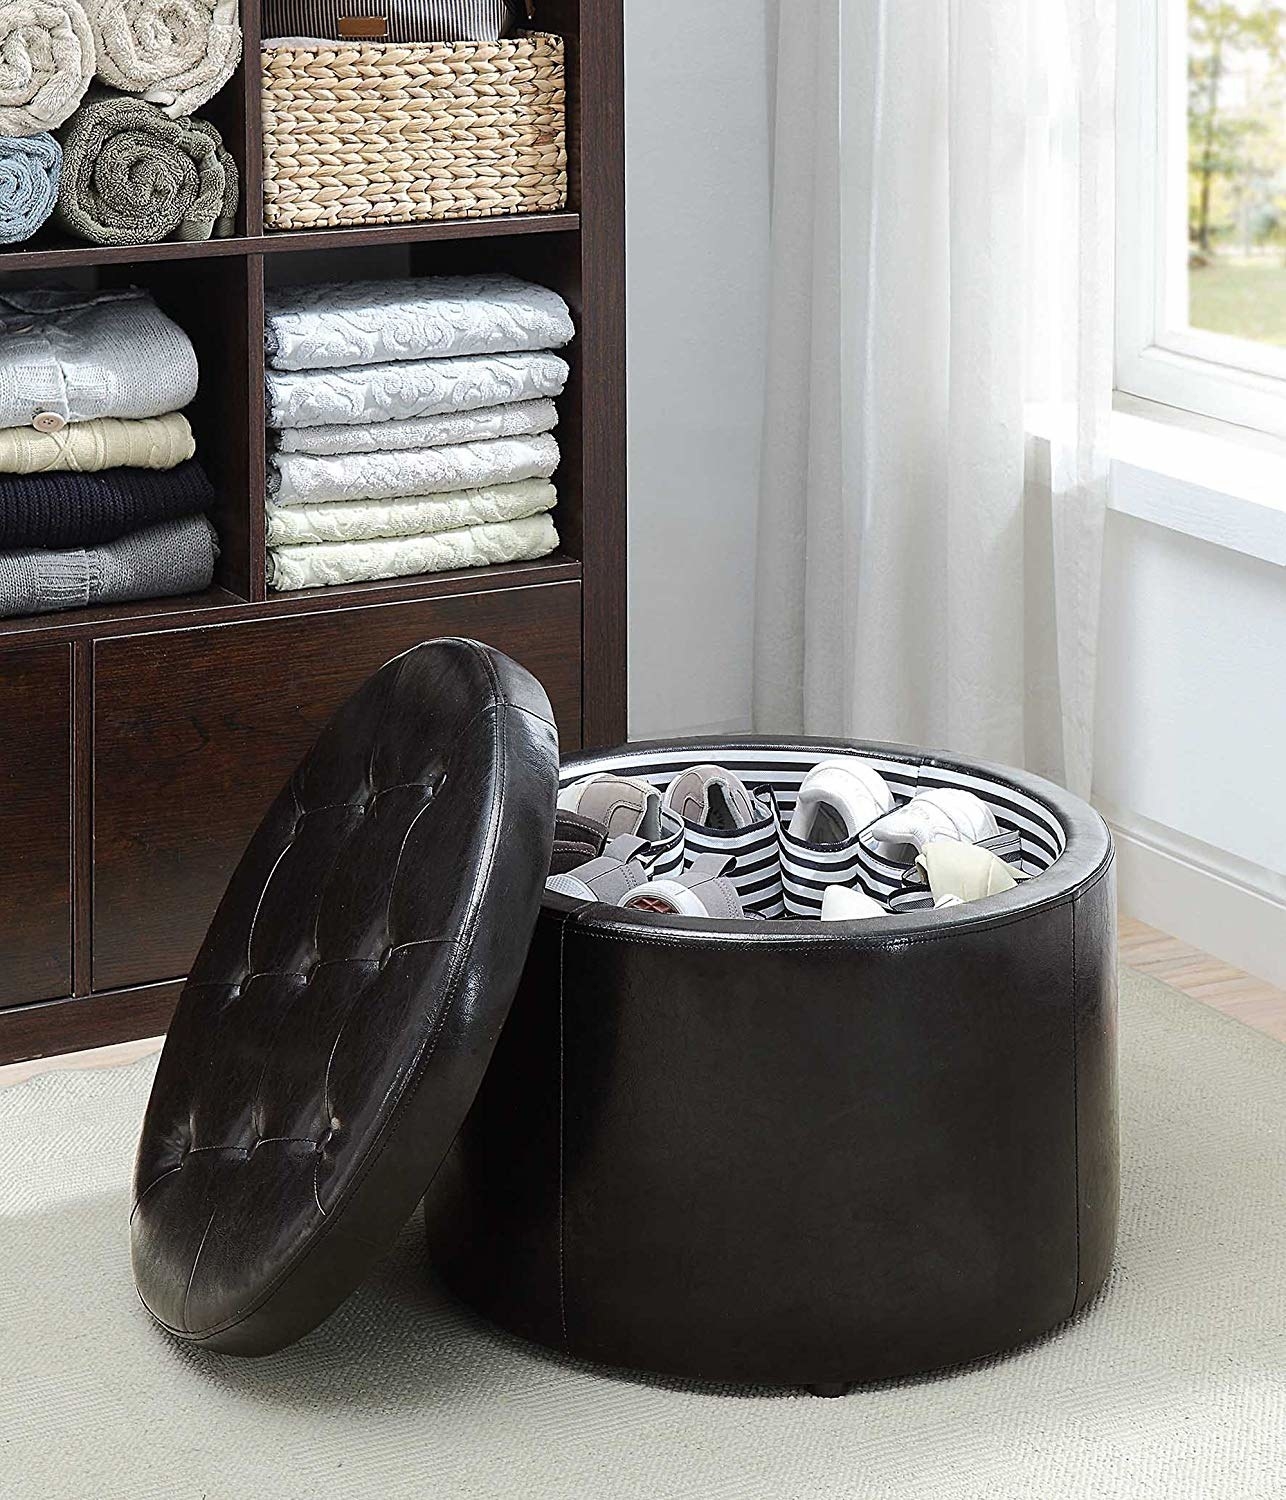 Circular faux-leather ottoman with the tufted lid next to it and striped fabric cubbies with shoes in inside of it